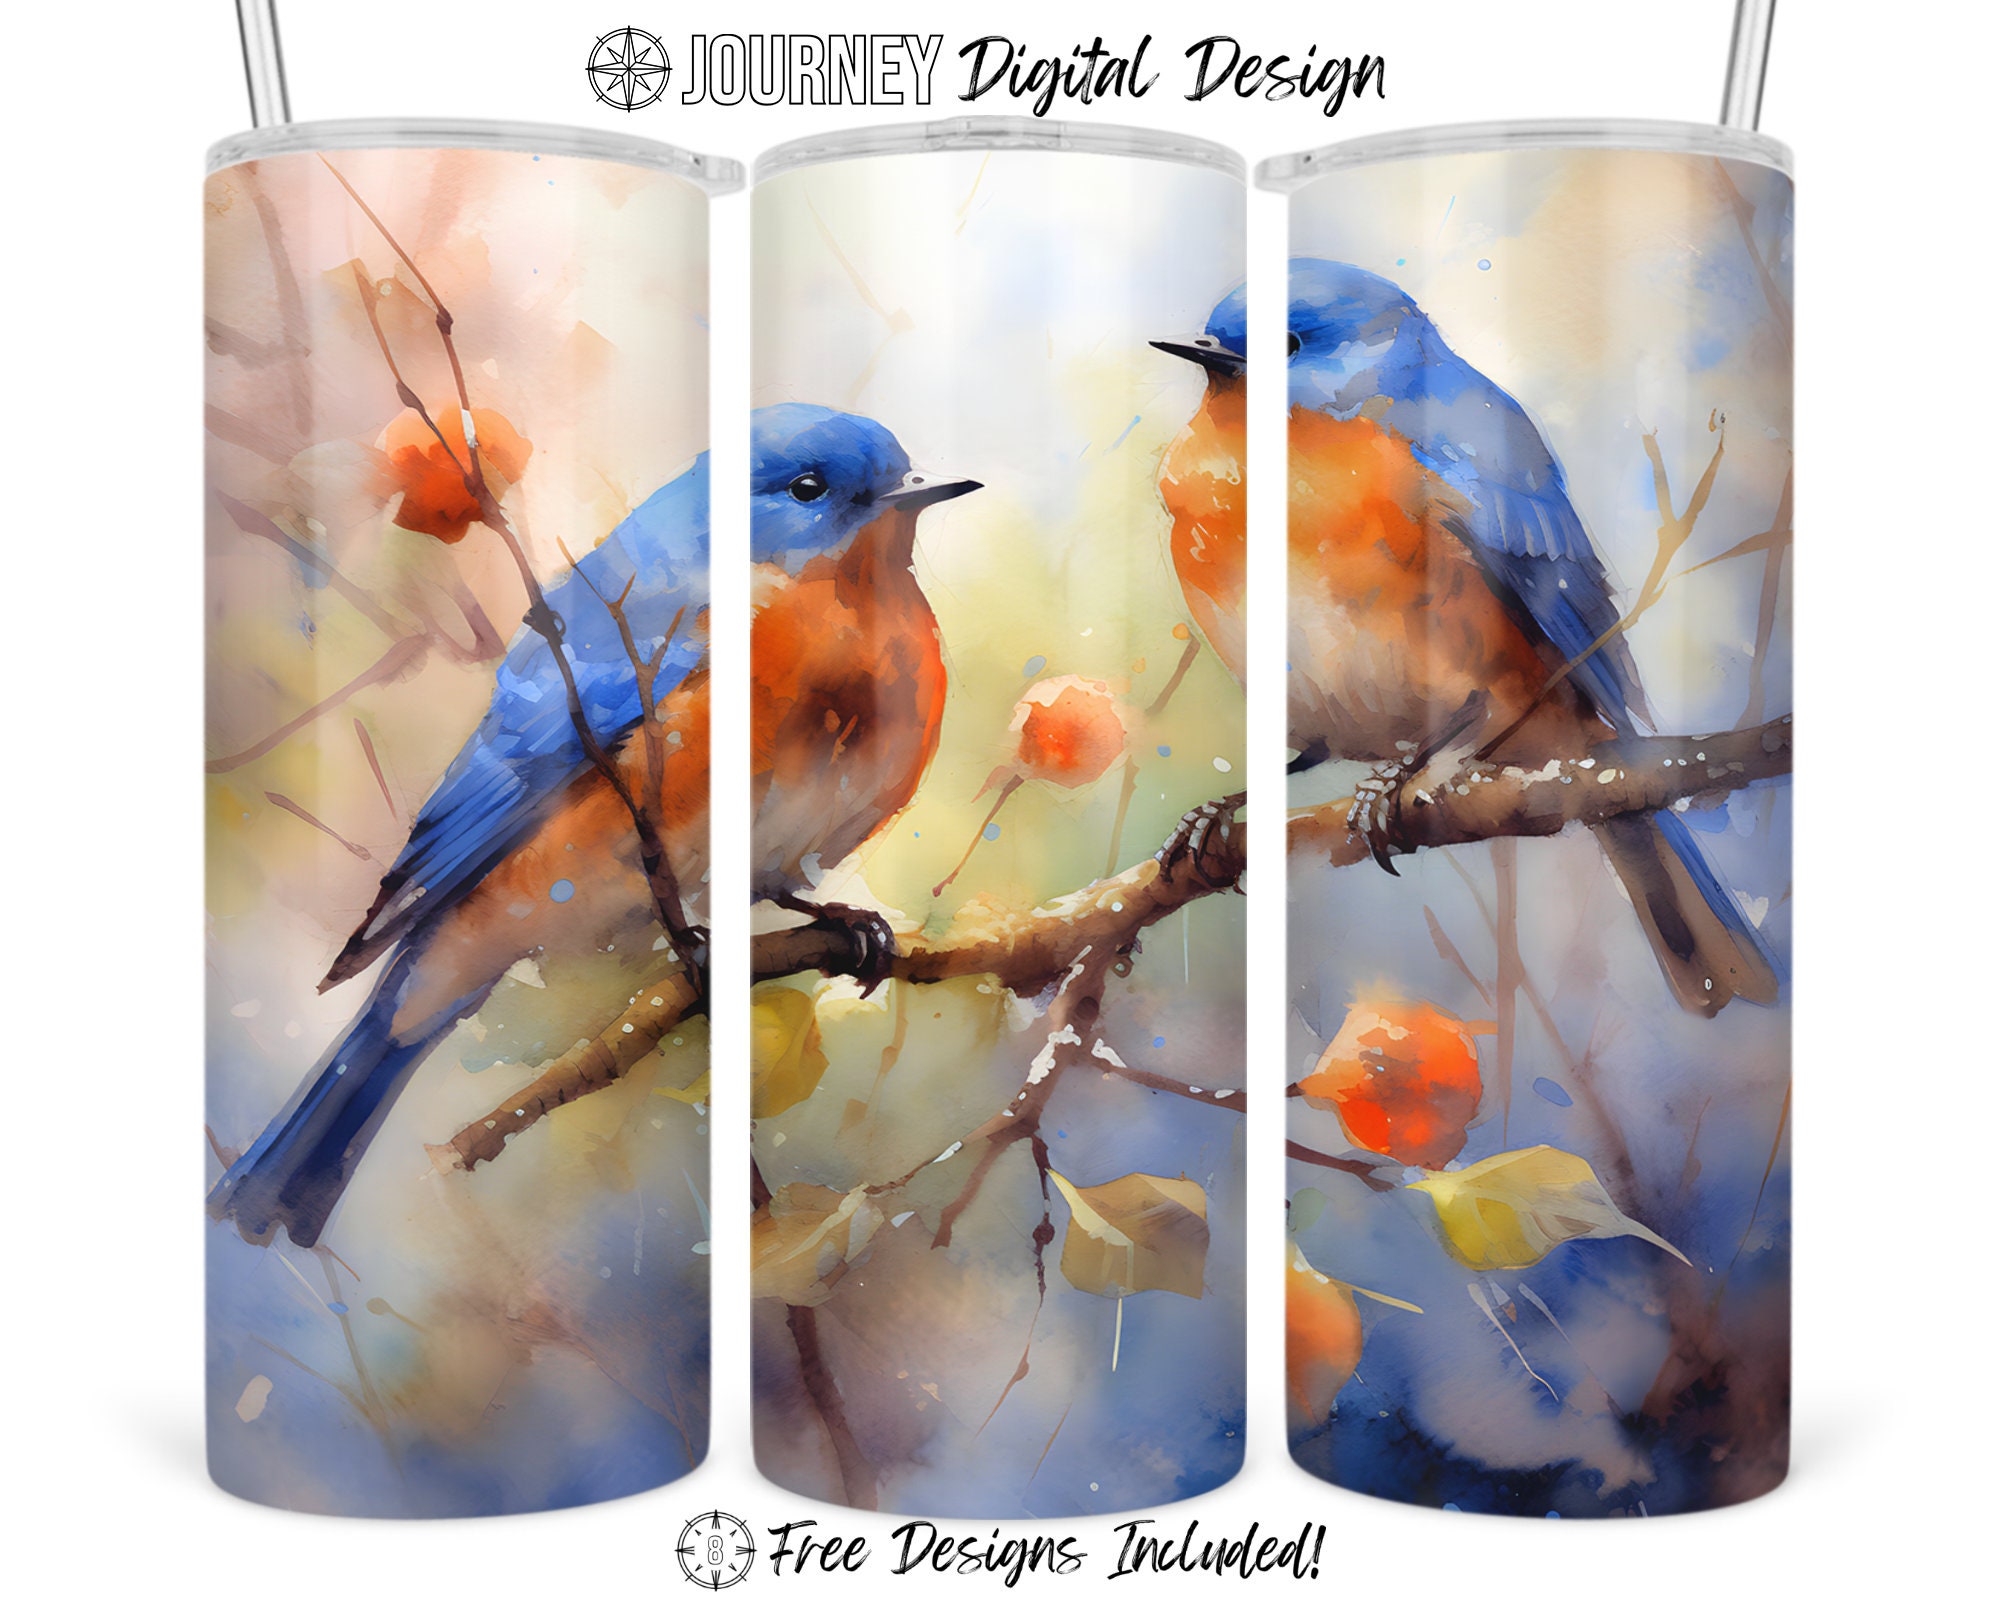 8 Watercolor Note Cards With Envelopes, Featuring a Watercolor Painting of  a Pair of Eastern Bluebirds by Laura Poss, Blank Inside 